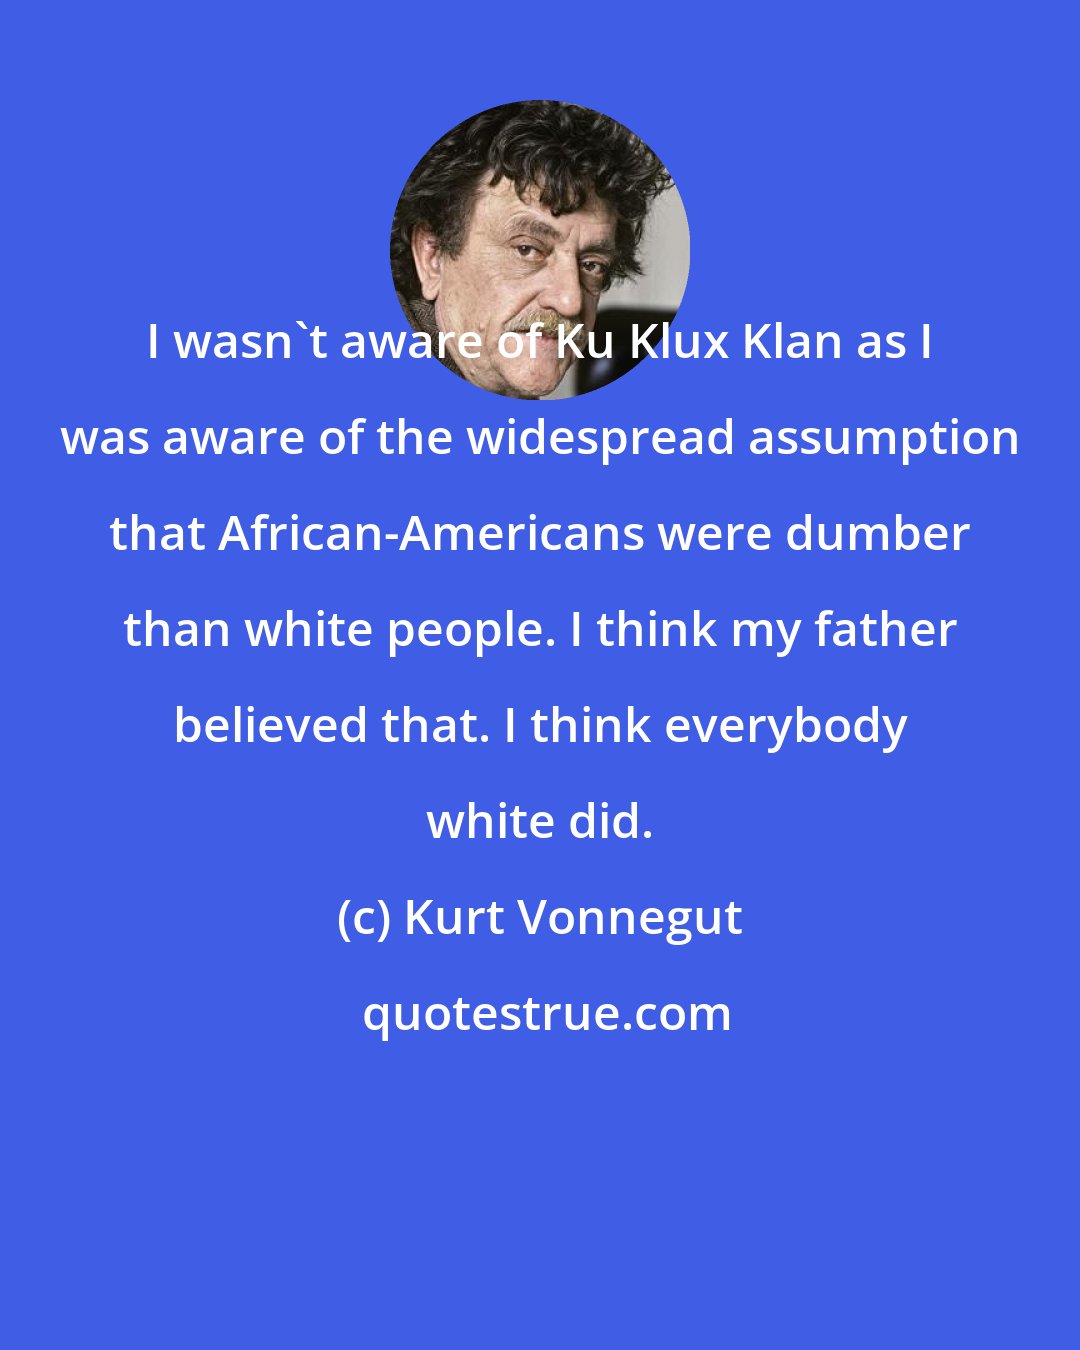 Kurt Vonnegut: I wasn't aware of Ku Klux Klan as I was aware of the widespread assumption that African-Americans were dumber than white people. I think my father believed that. I think everybody white did.